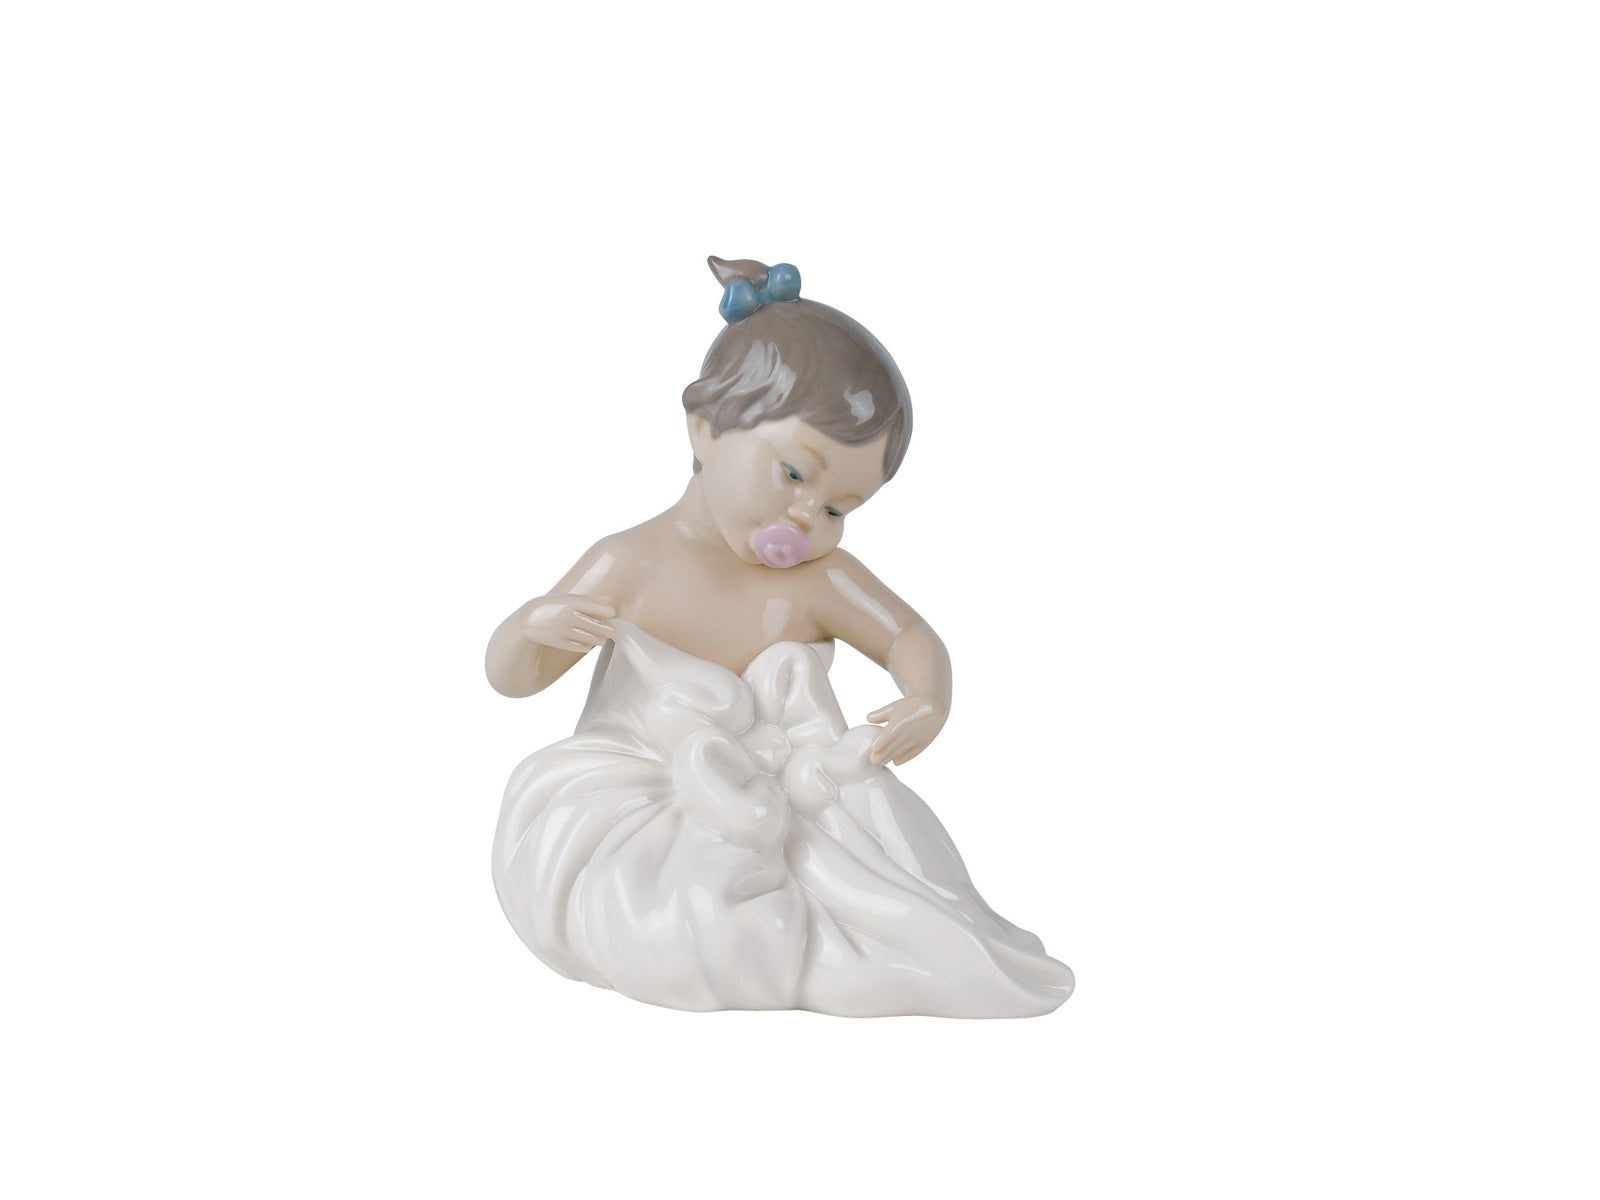 An adorable glazed porcelain figurine of a young girl with her lovely dark hair tied up into two buns, holding and looking at her favourite blanky. A memory I am sure a few of us can share. Size: 16 x 13 cm By Nao Product Code: 02001337